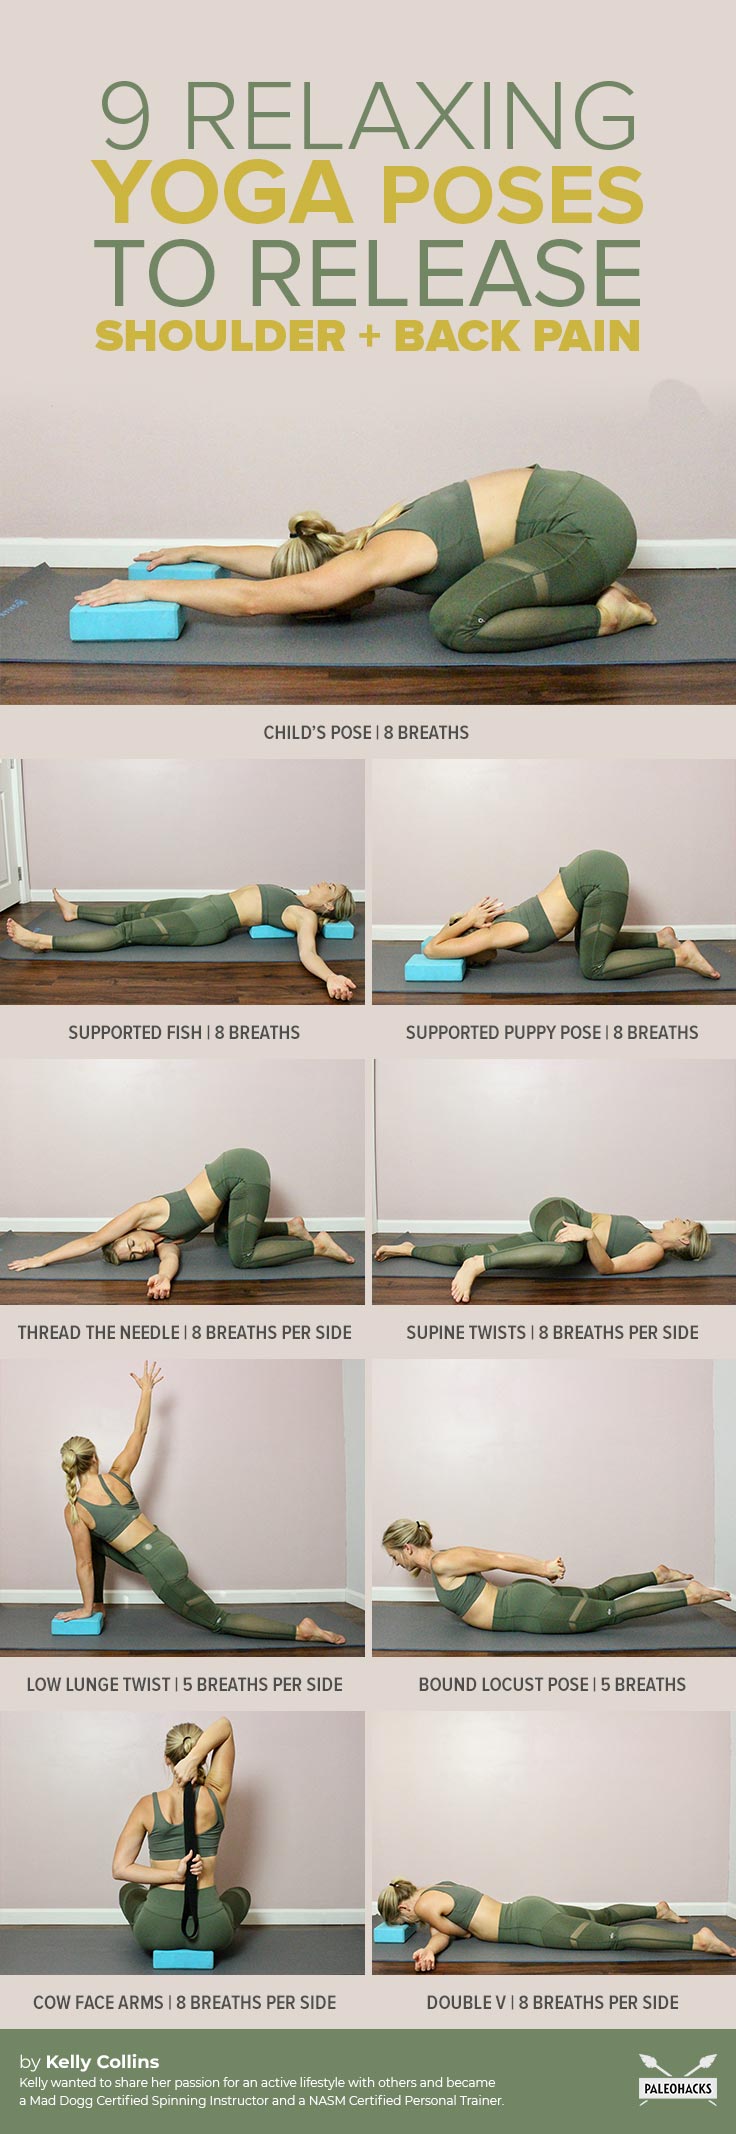 Yoga is a great way to realign your back and shoulders while increasing flexibility throughout your entire body. Use these easy poses daily to release tightness and alleviate pain.